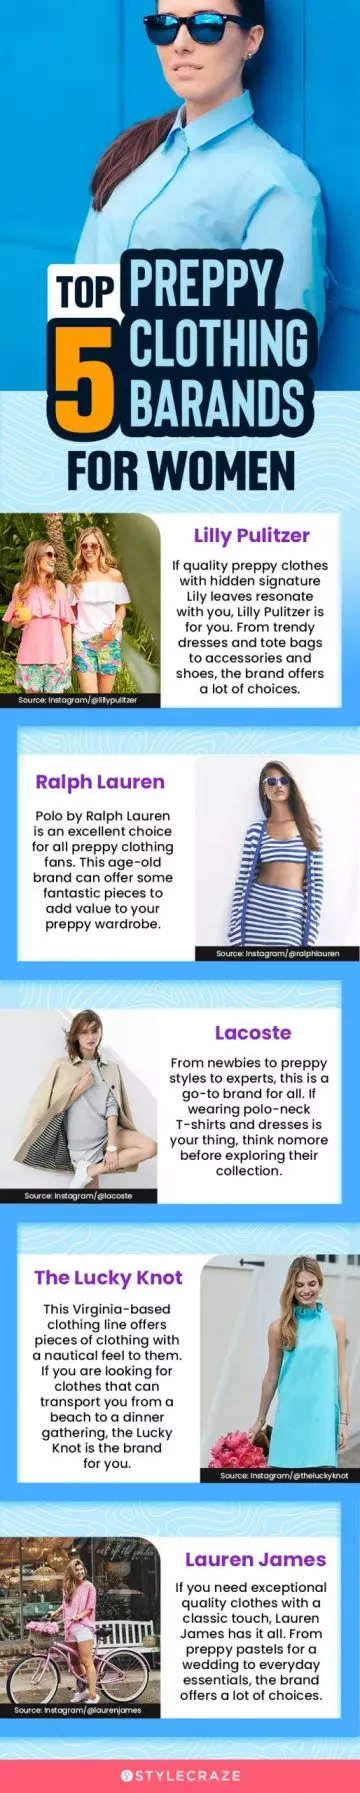 5 preppy clothing brands (infographic)